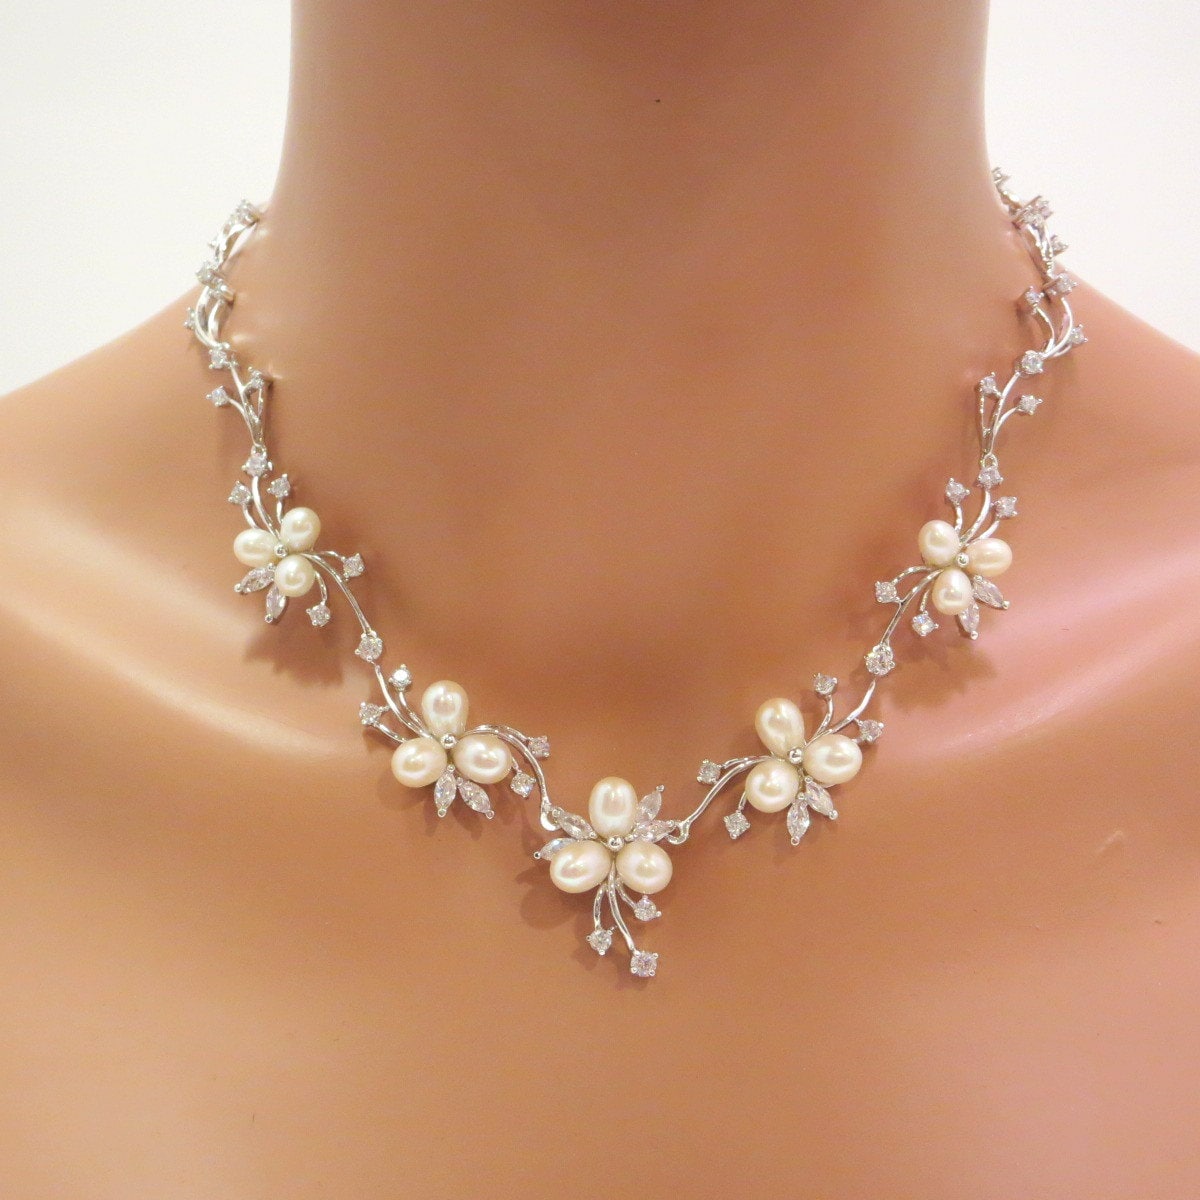 Pearl Bridal necklace set Pearl bridal by TheExquisiteBride